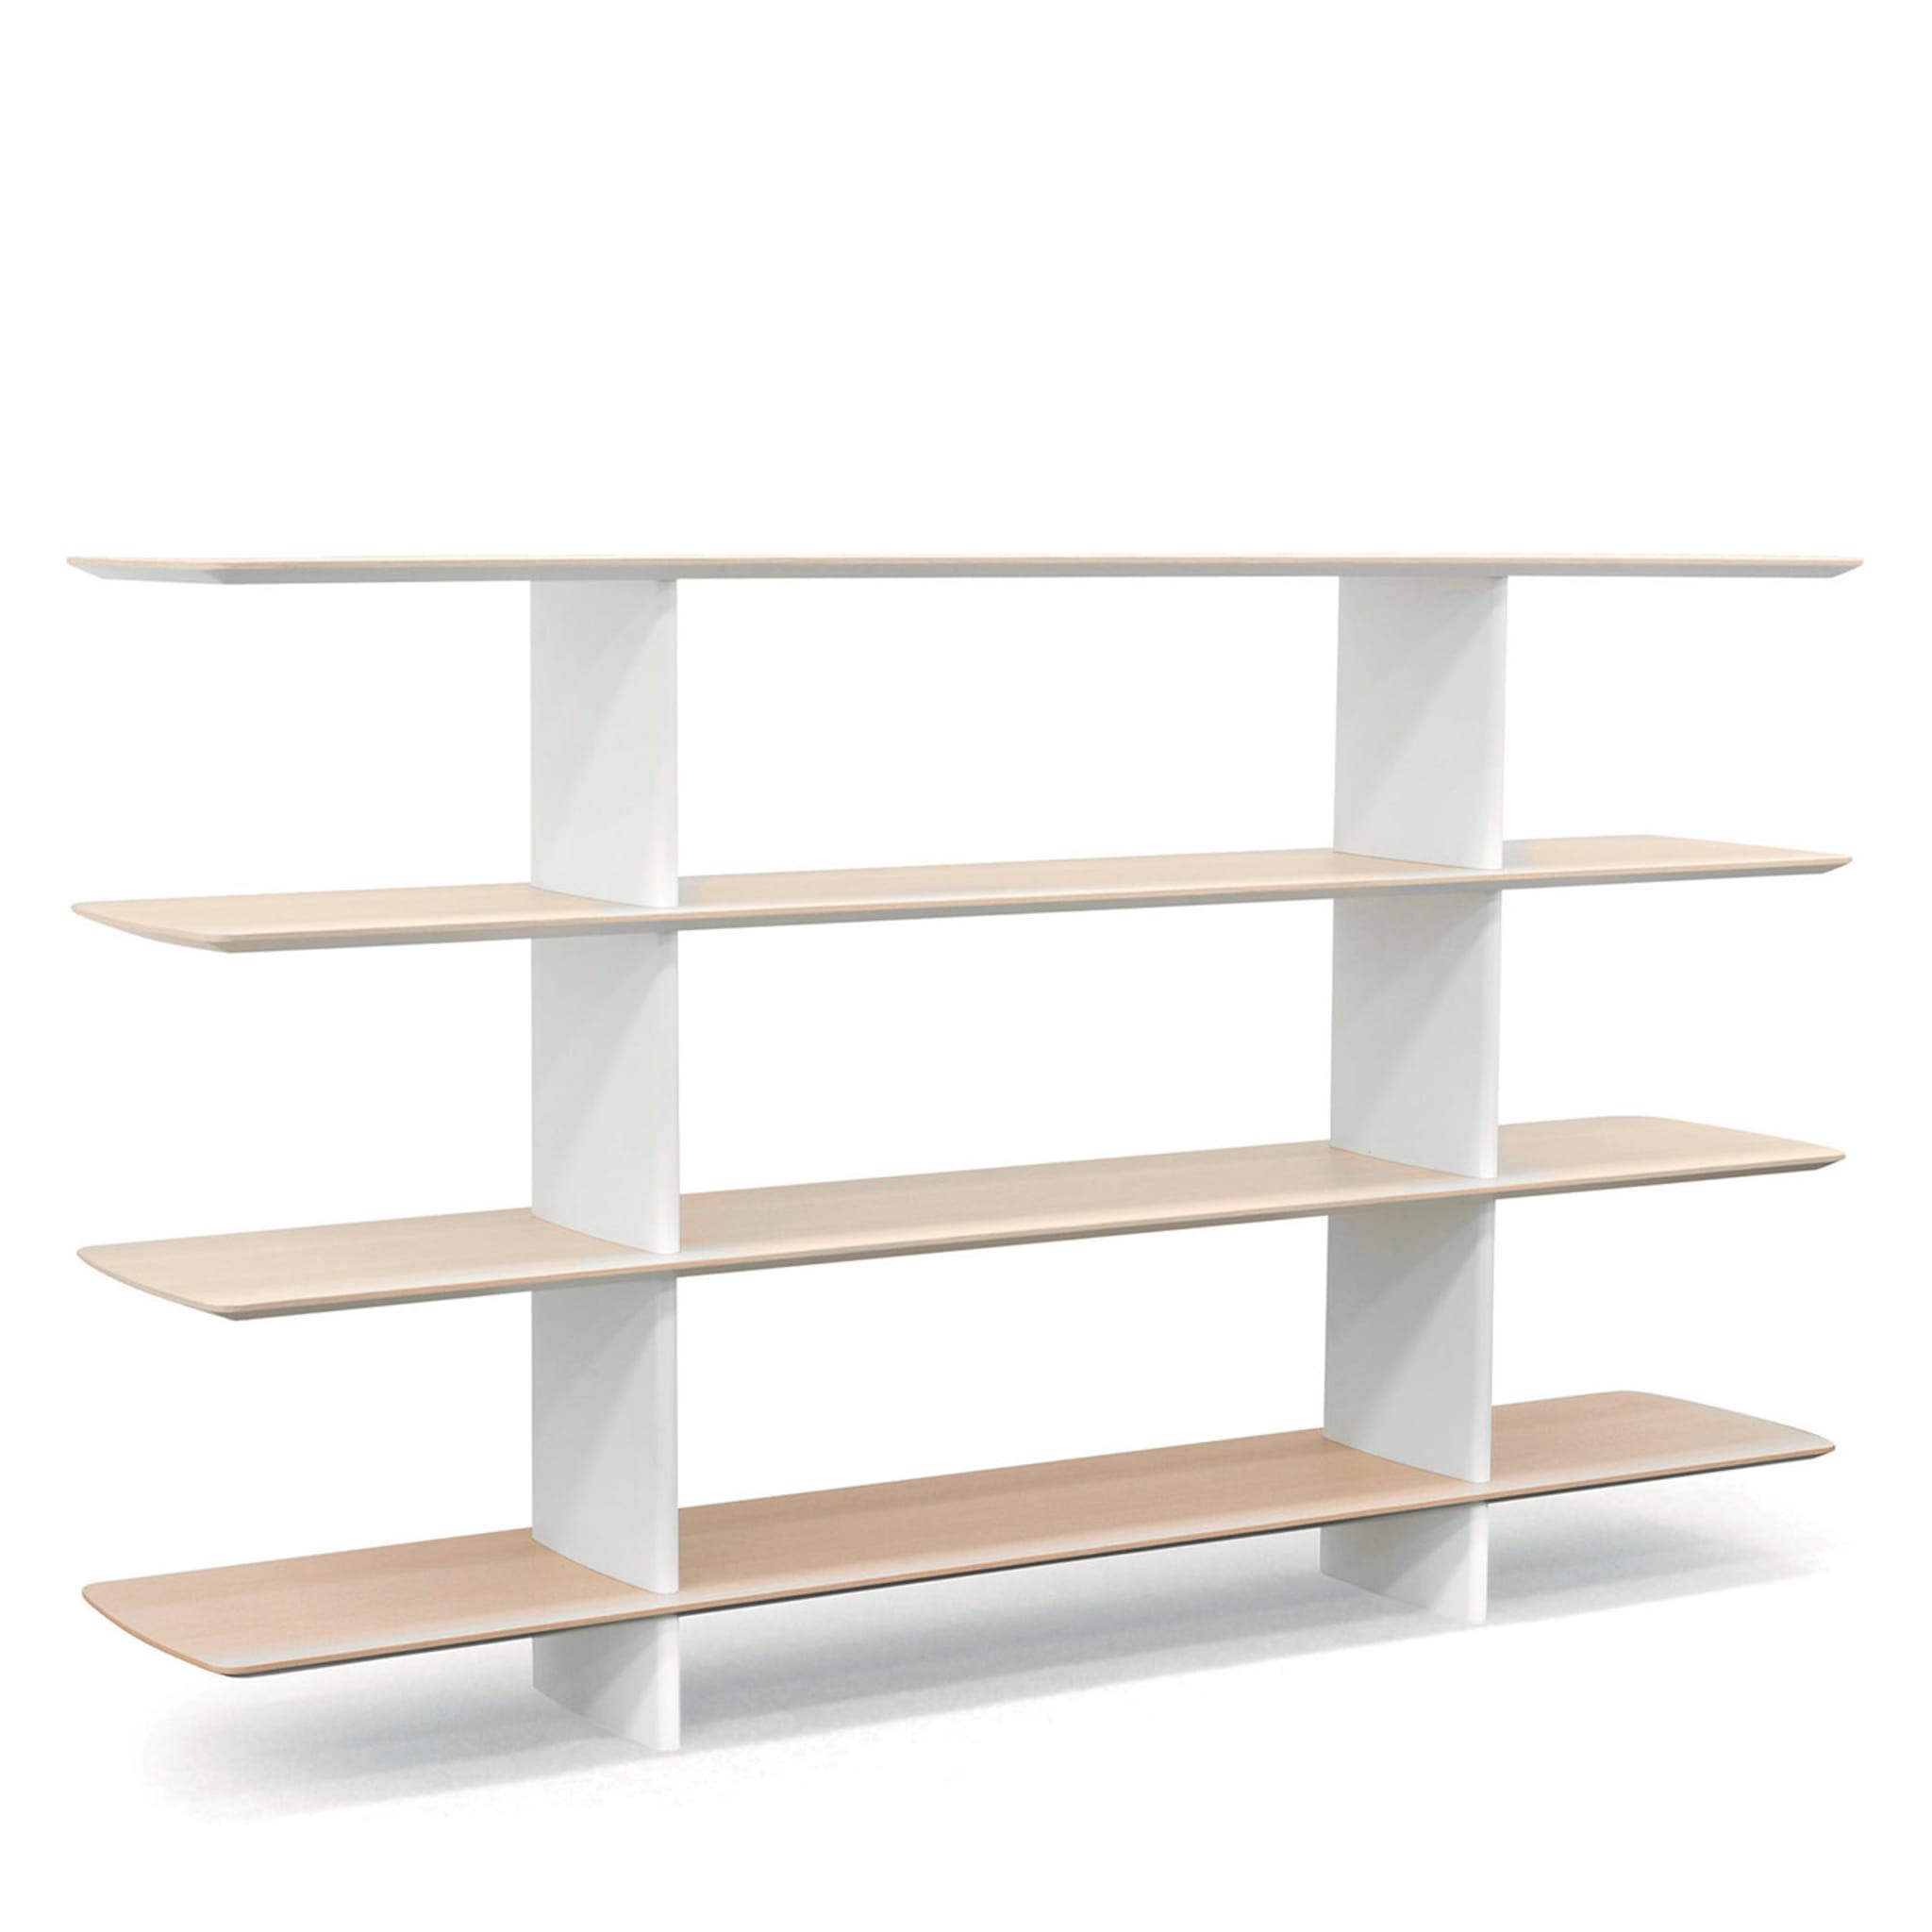 Shift White and Durmast 4-Shelf Bookcase by Foster + Partners - Alternative view 1